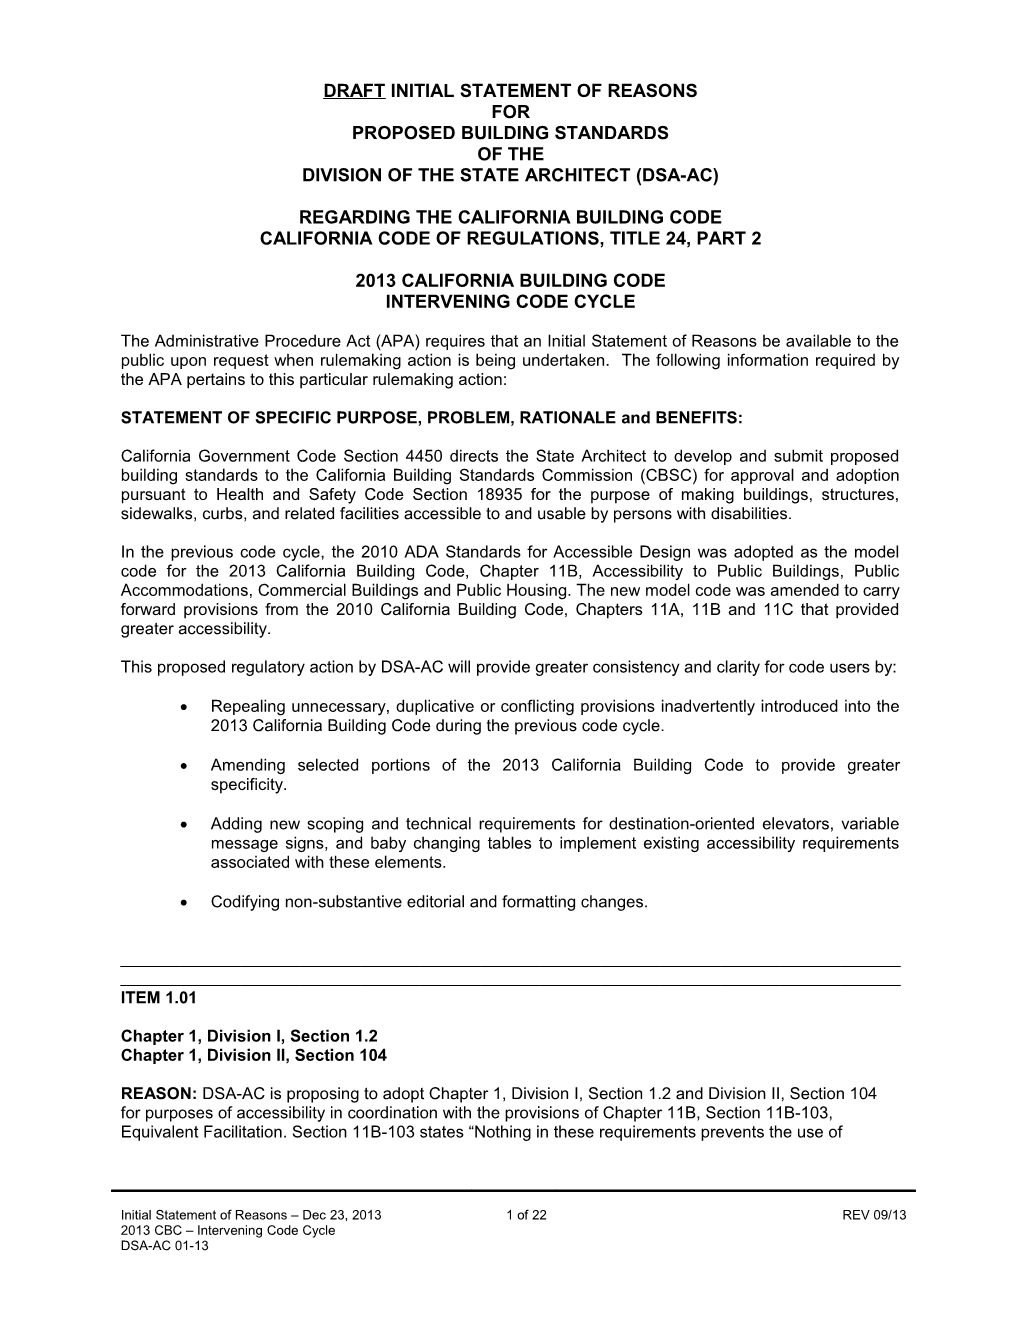 DRAFT Initial Statement of Reasons for Proposed Building Standards of the Division of The